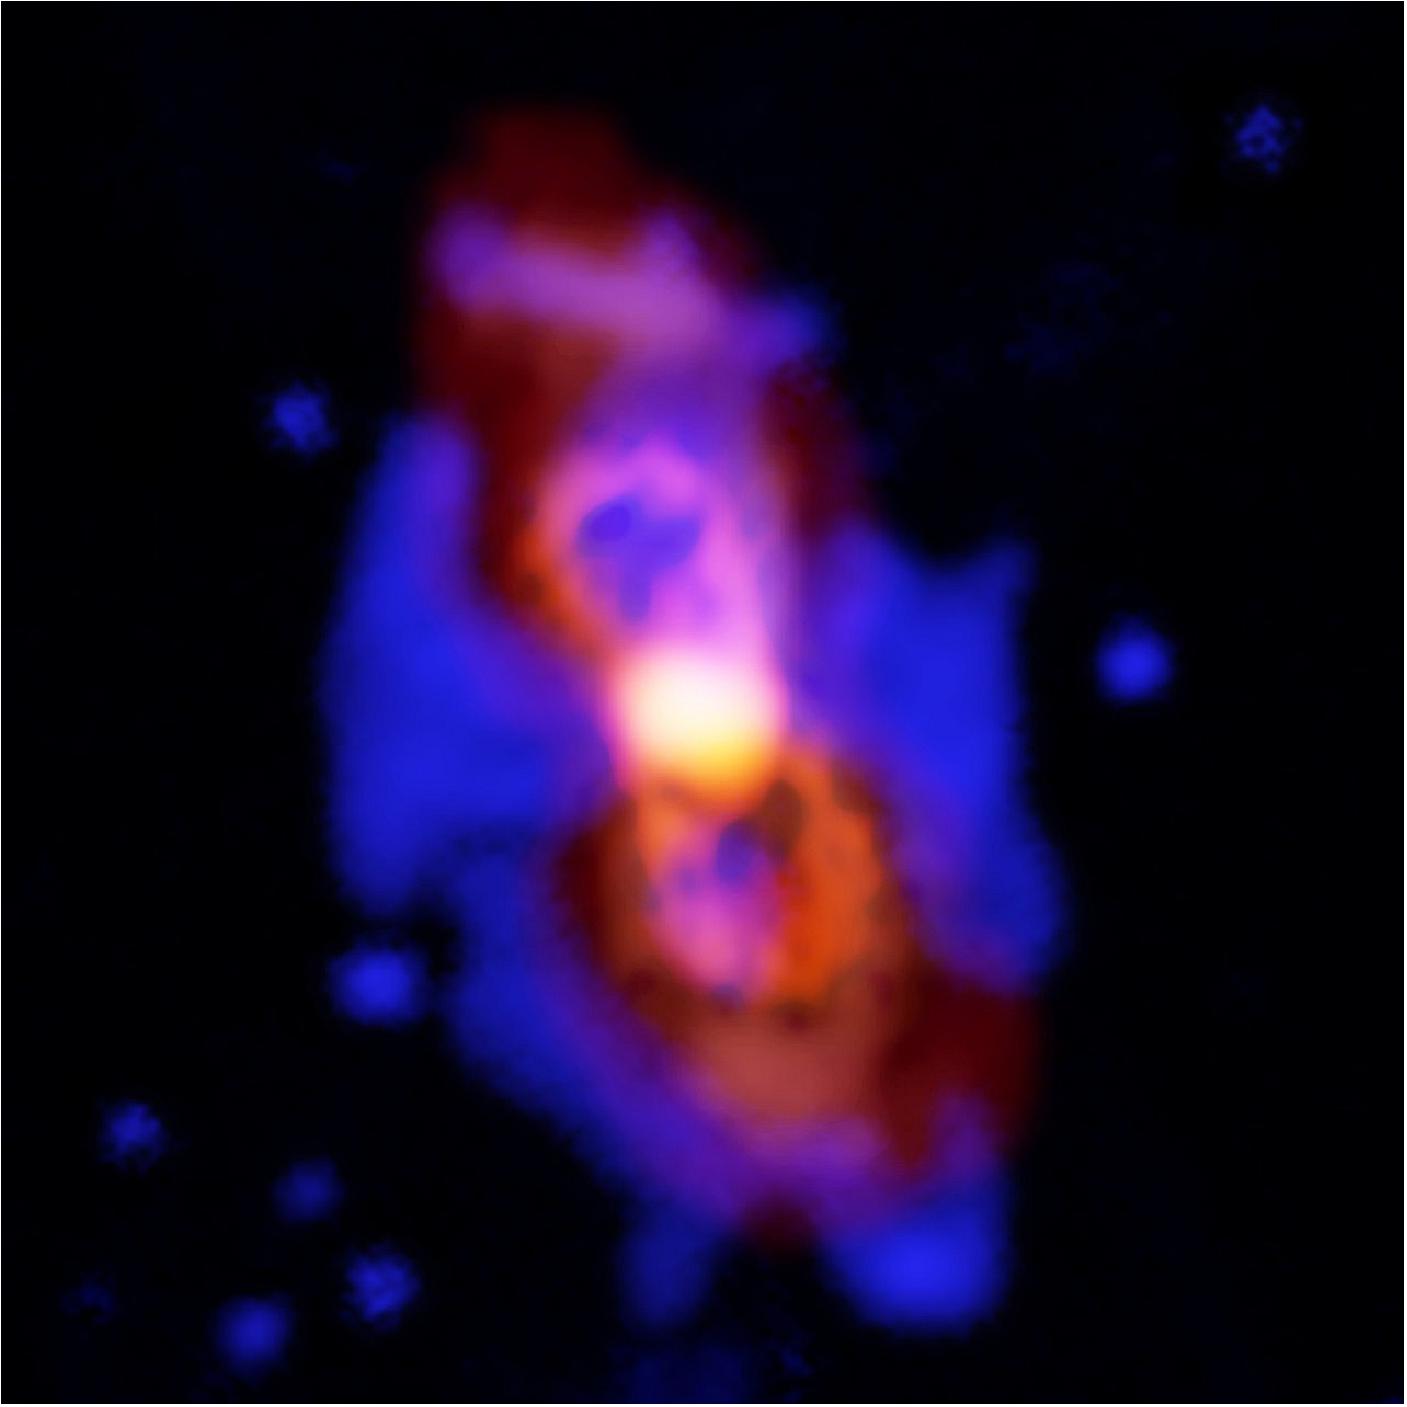 Figure 17: Radioactive molecules in the remains of a stellar collision (image credit: ESO)